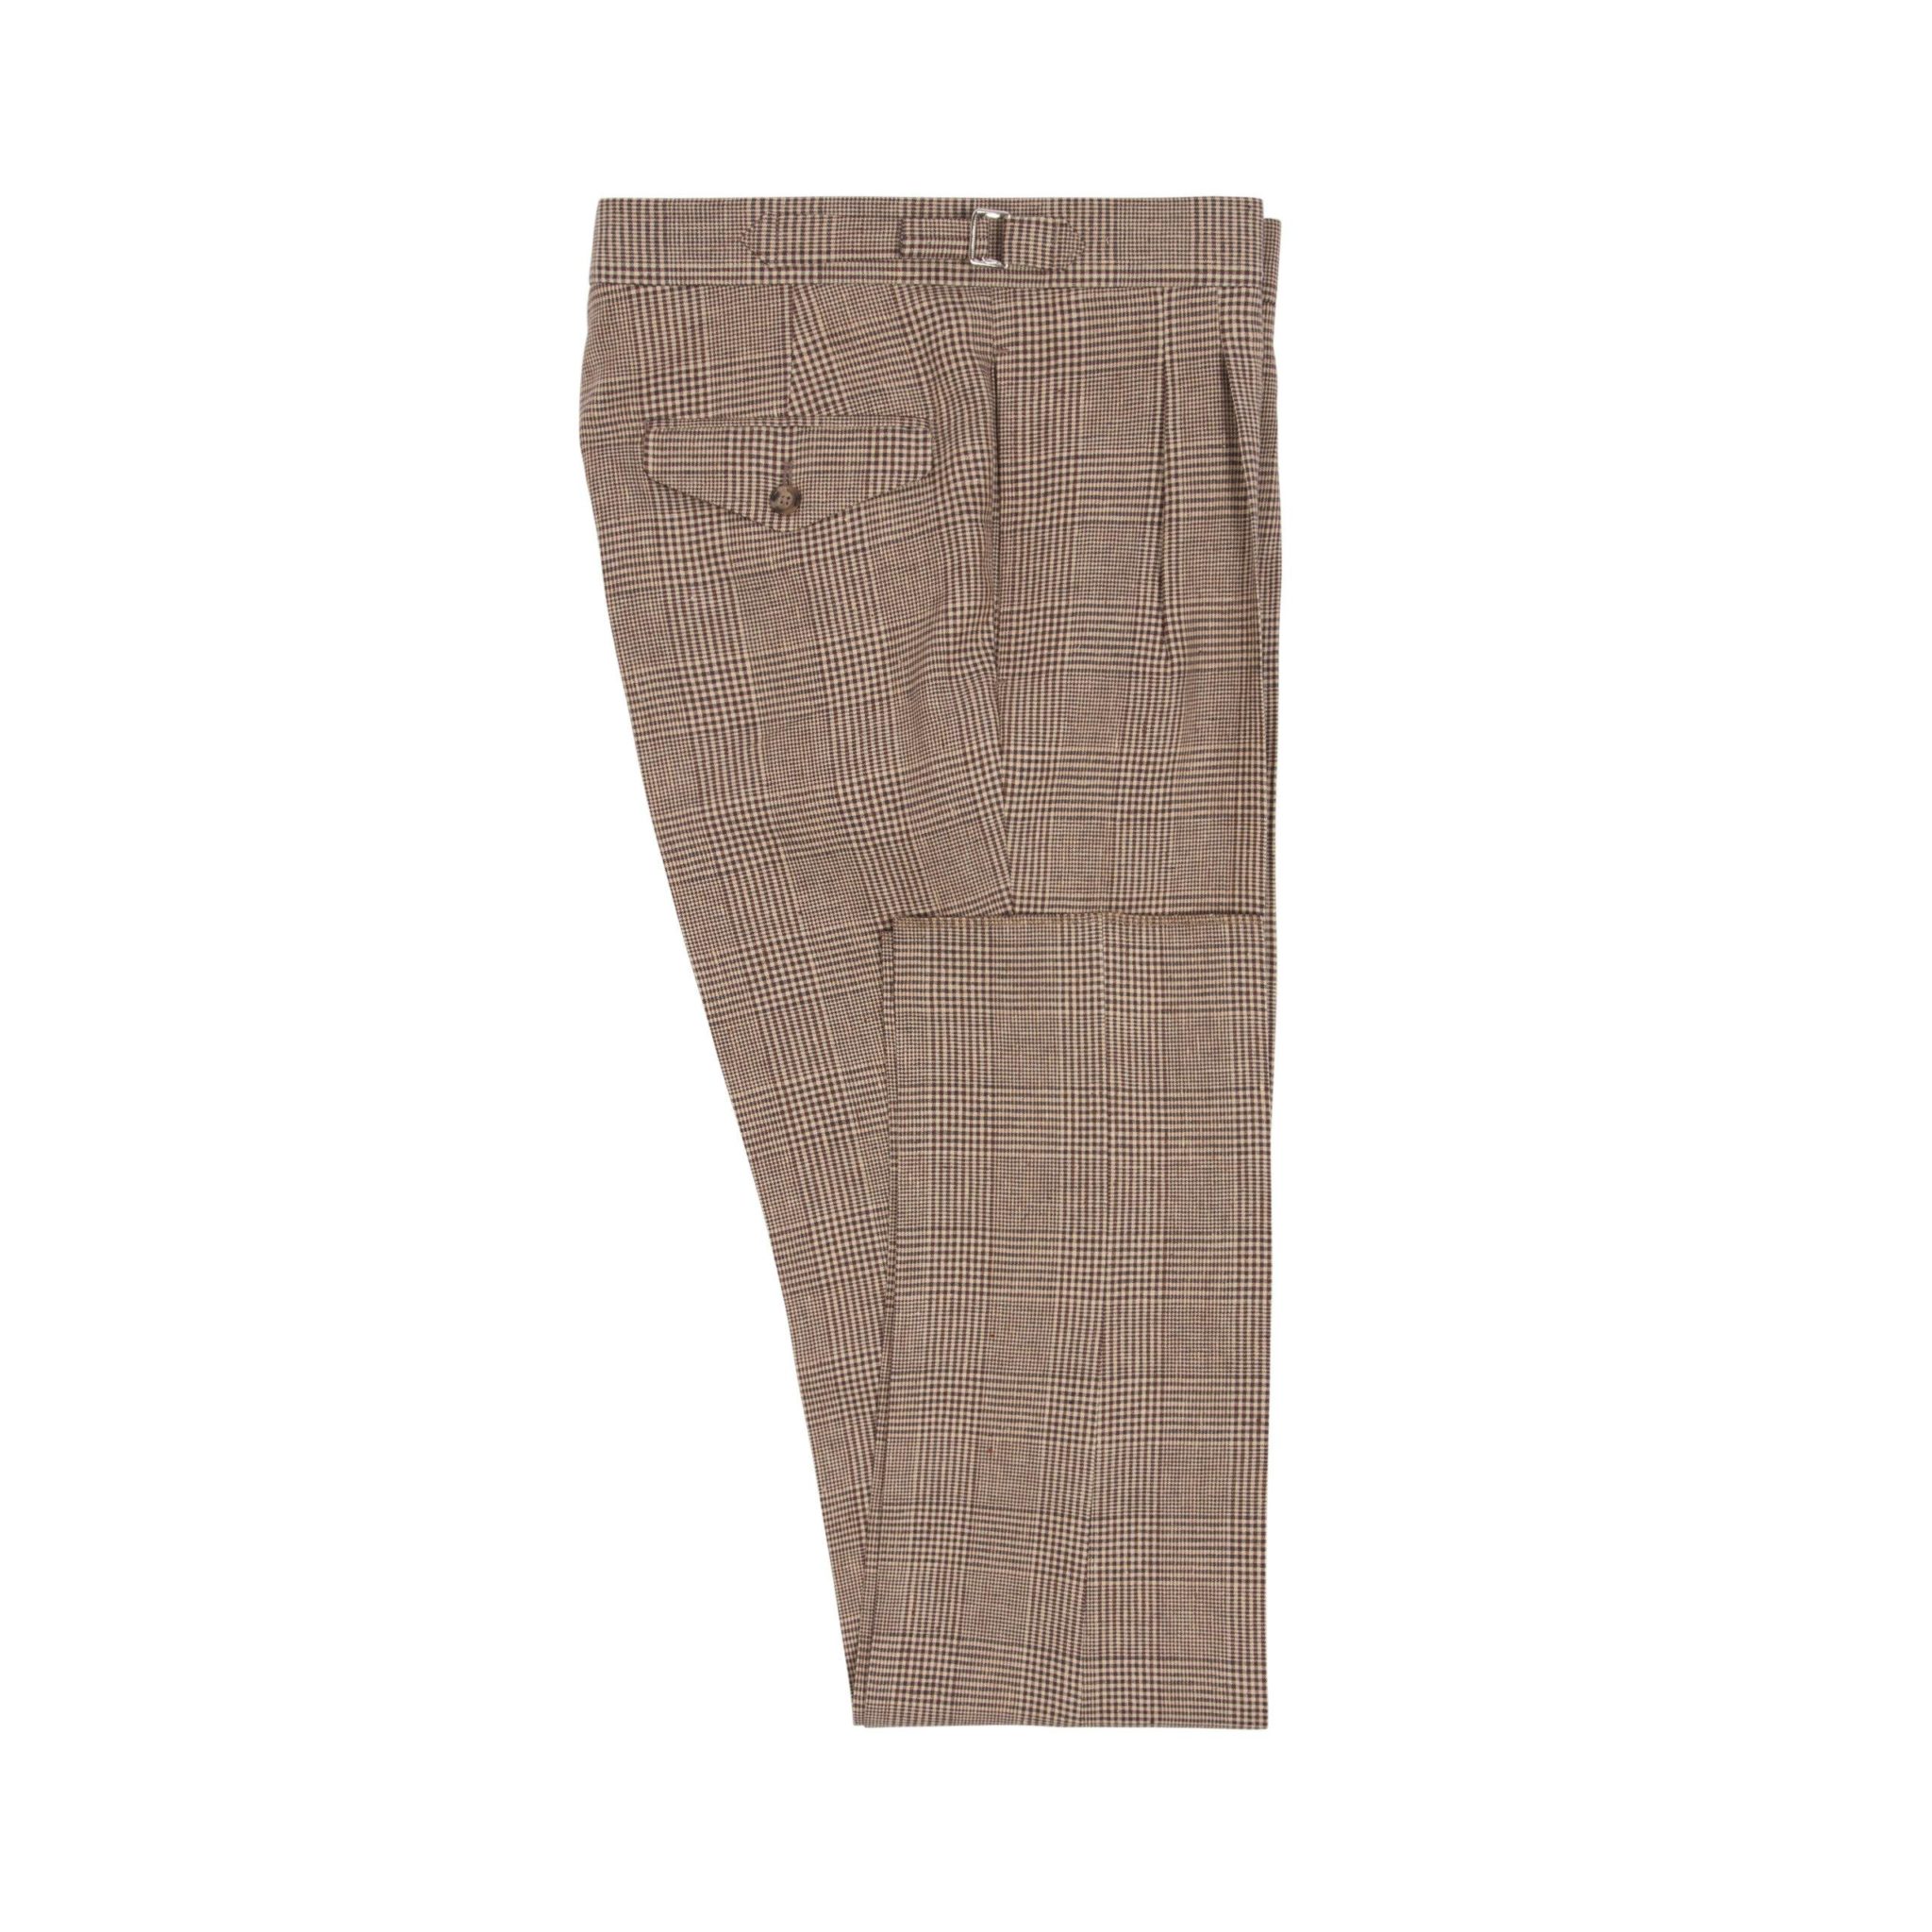 Ivory and Brown Linen Glencheck Pleated Trousers